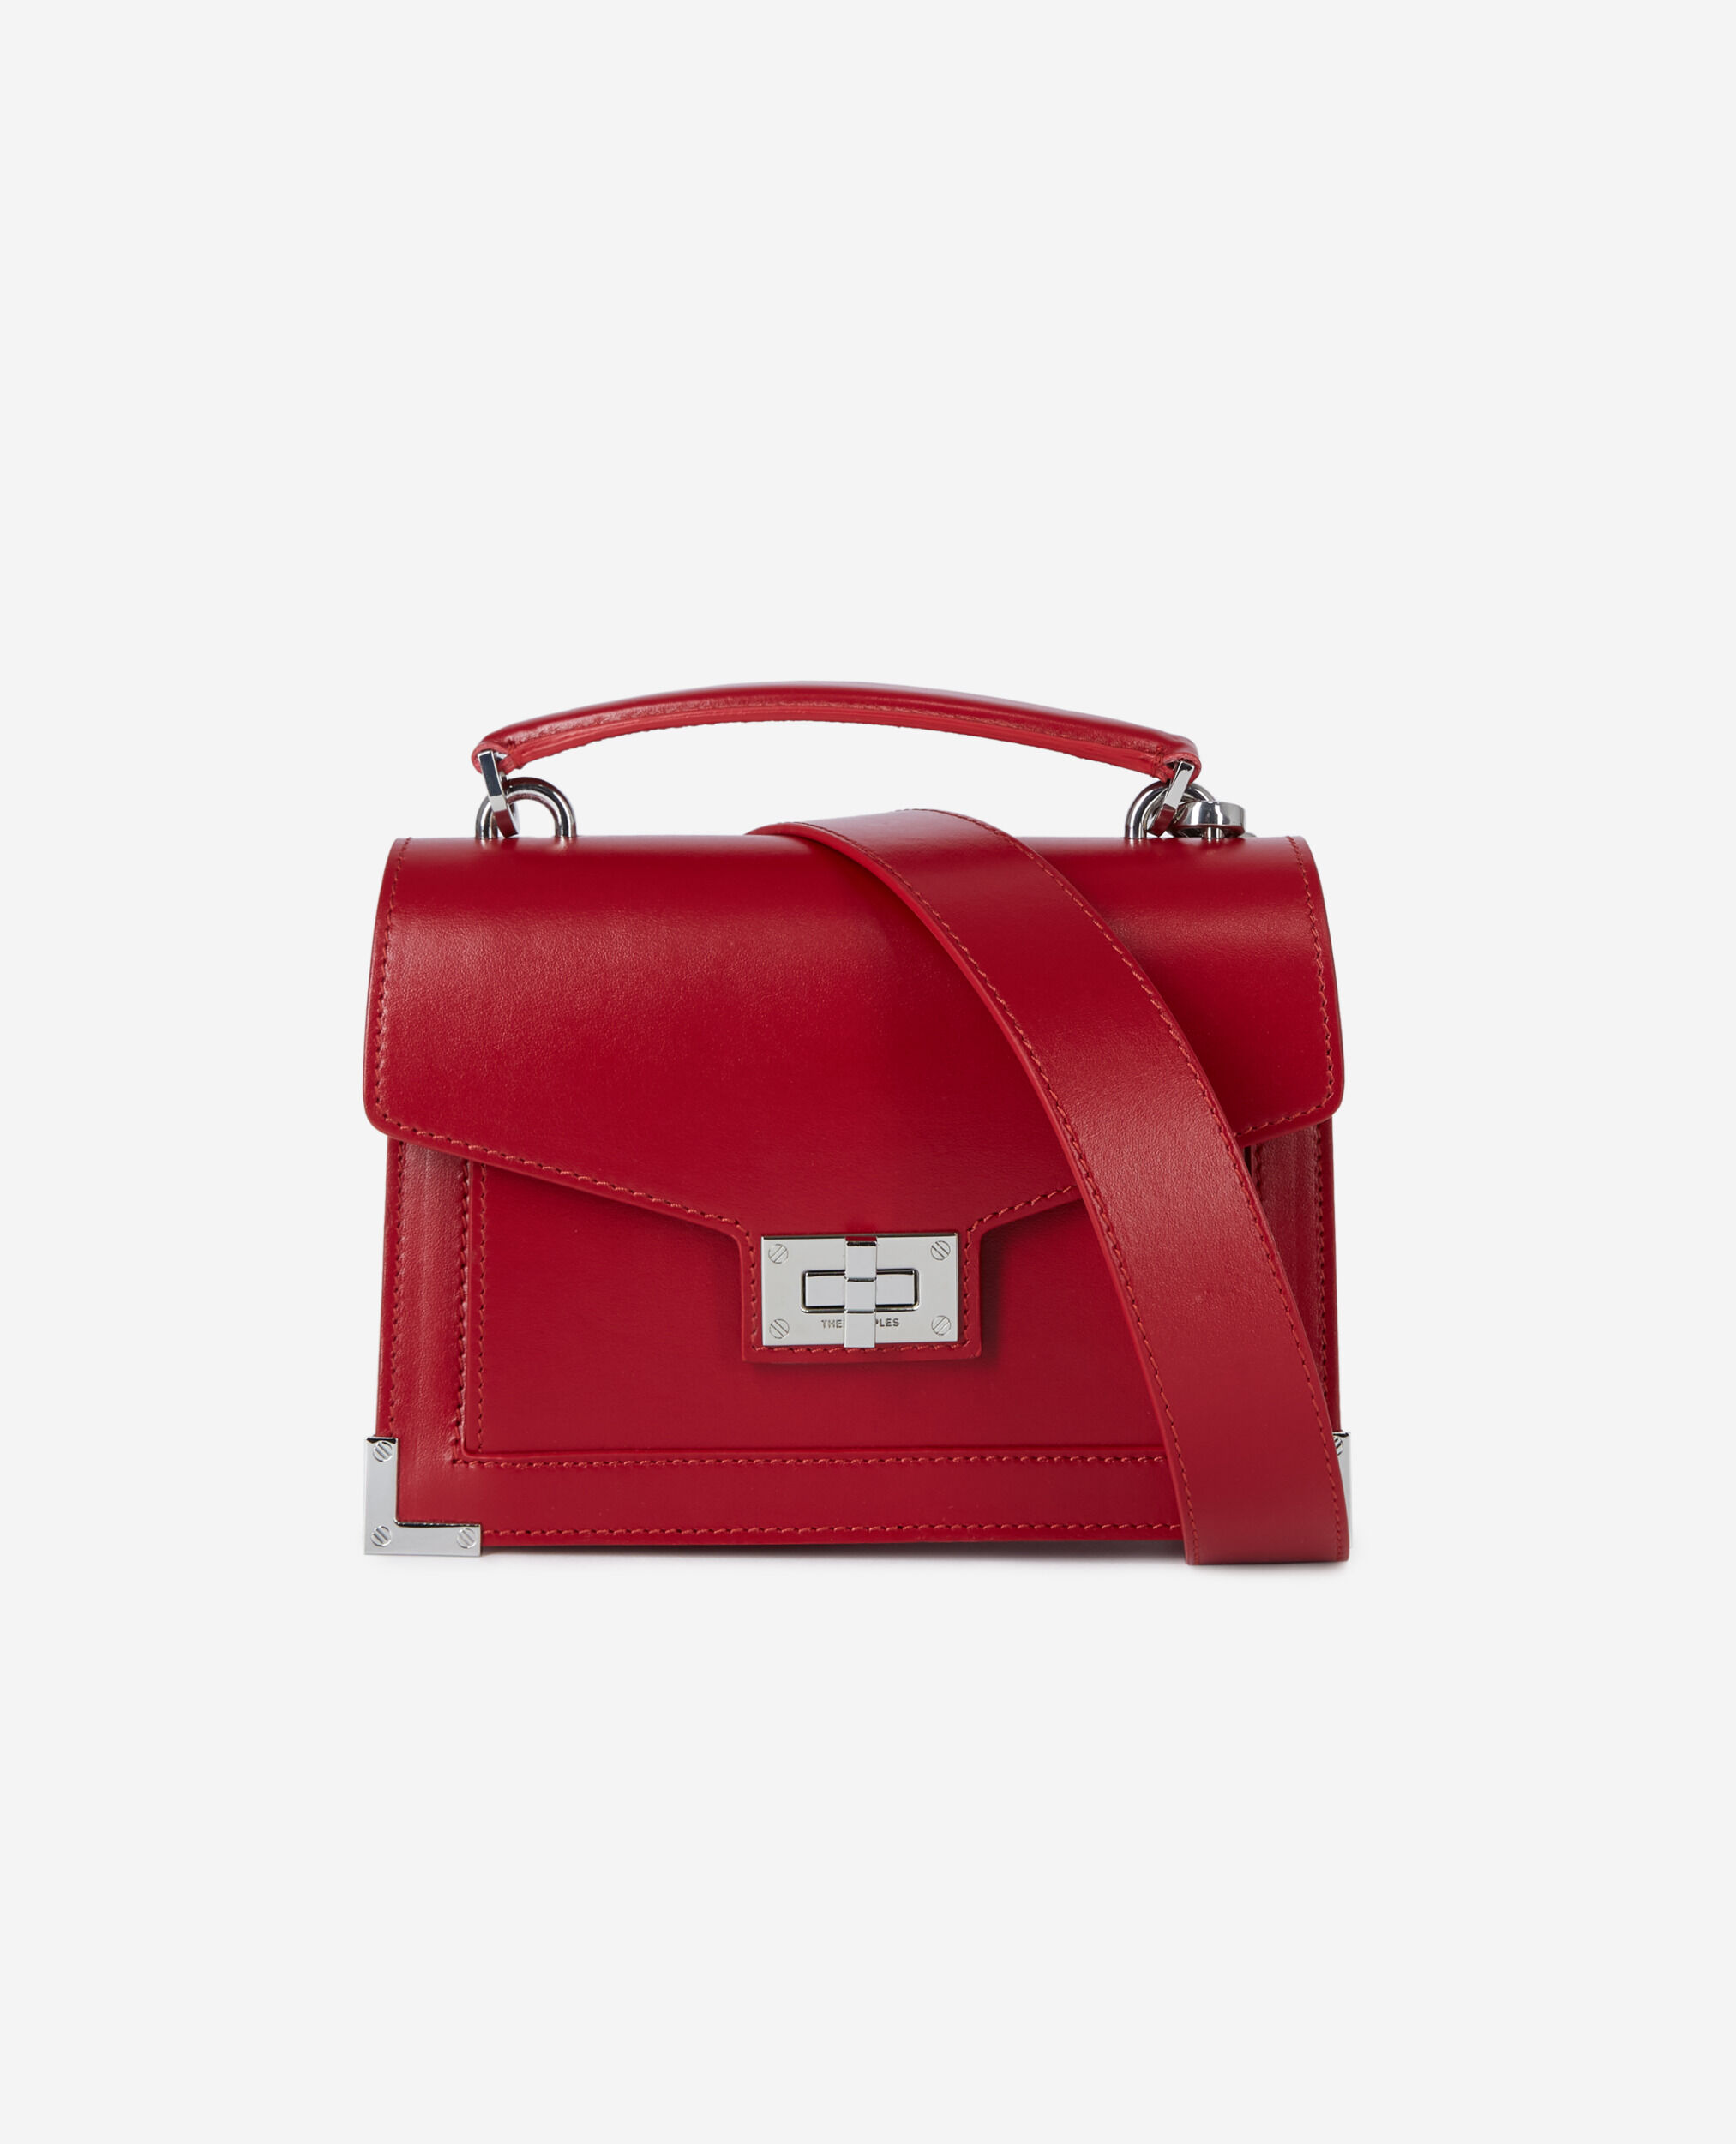 Small red Emily bag | The Kooples - US